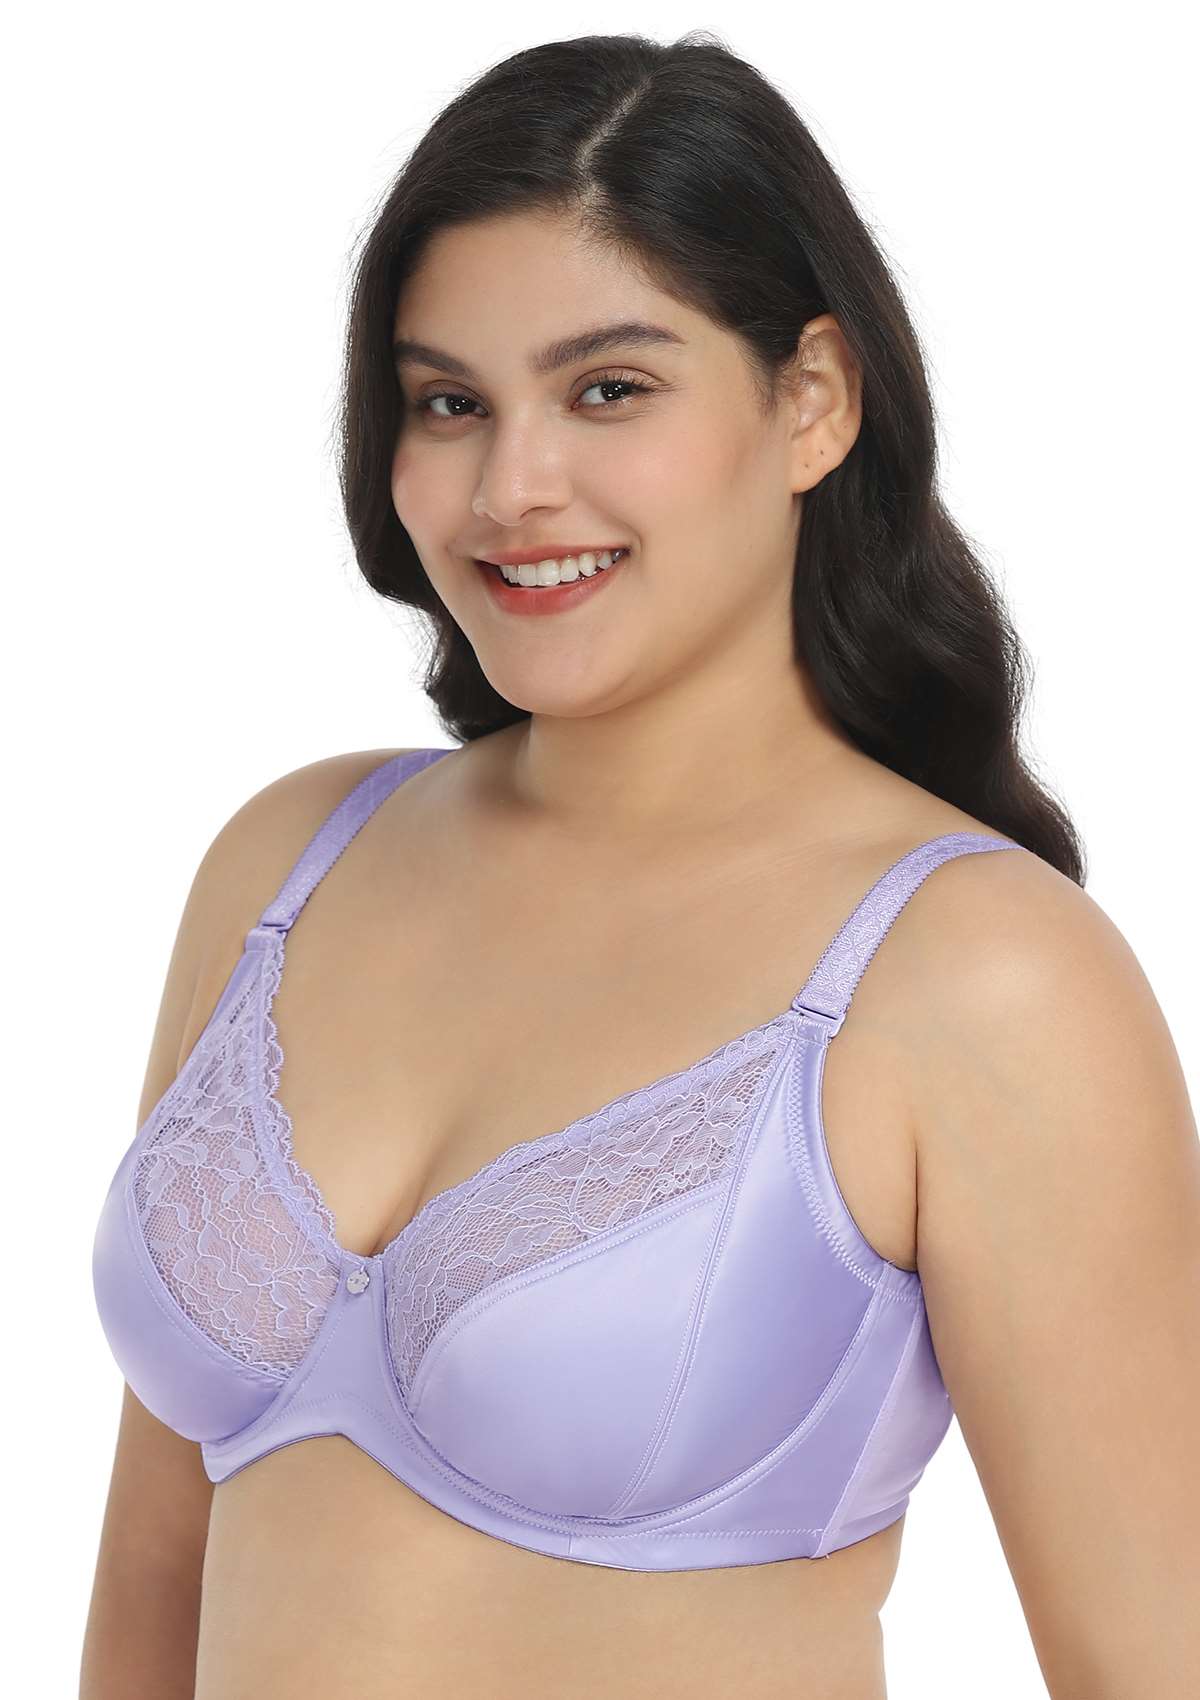 HSIA Foxy Satin Silky Full Coverage Underwire Bra With Floral Lace Trim - Purple / 44 / D